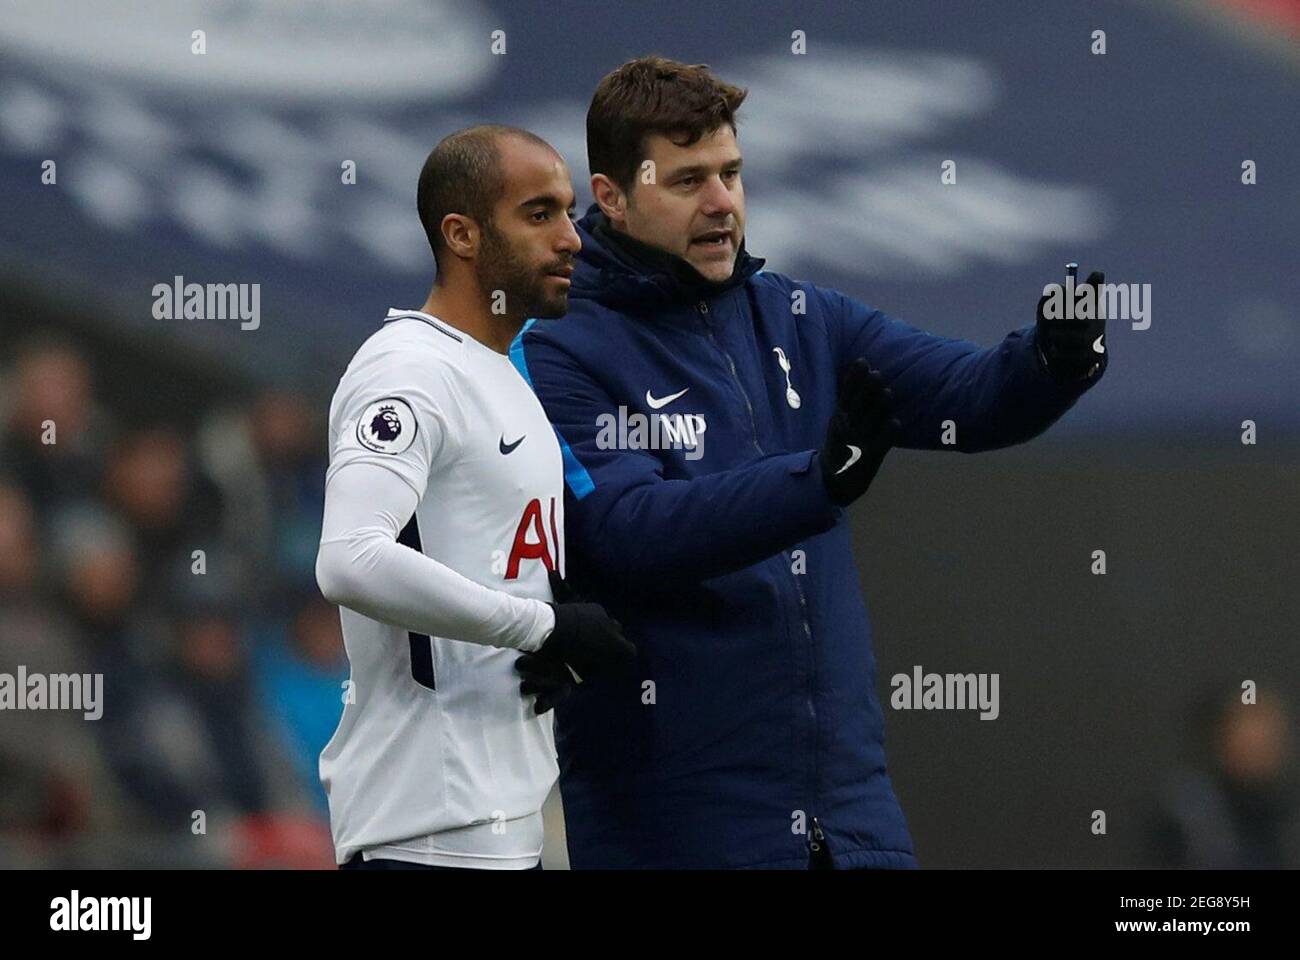 Soccer Football - Premier League - Tottenham Hotspur vs Huddersfield Town - Wembley Stadium, London, Britain - March 3, 2018   Tottenham's Lucas Moura with manager Mauricio Pochettino as he waits to be substituted   REUTERS/Eddie Keogh    EDITORIAL USE ONLY. No use with unauthorized audio, video, data, fixture lists, club/league logos or 'live' services. Online in-match use limited to 75 images, no video emulation. No use in betting, games or single club/league/player publications.  Please contact your account representative for further details. Stock Photo